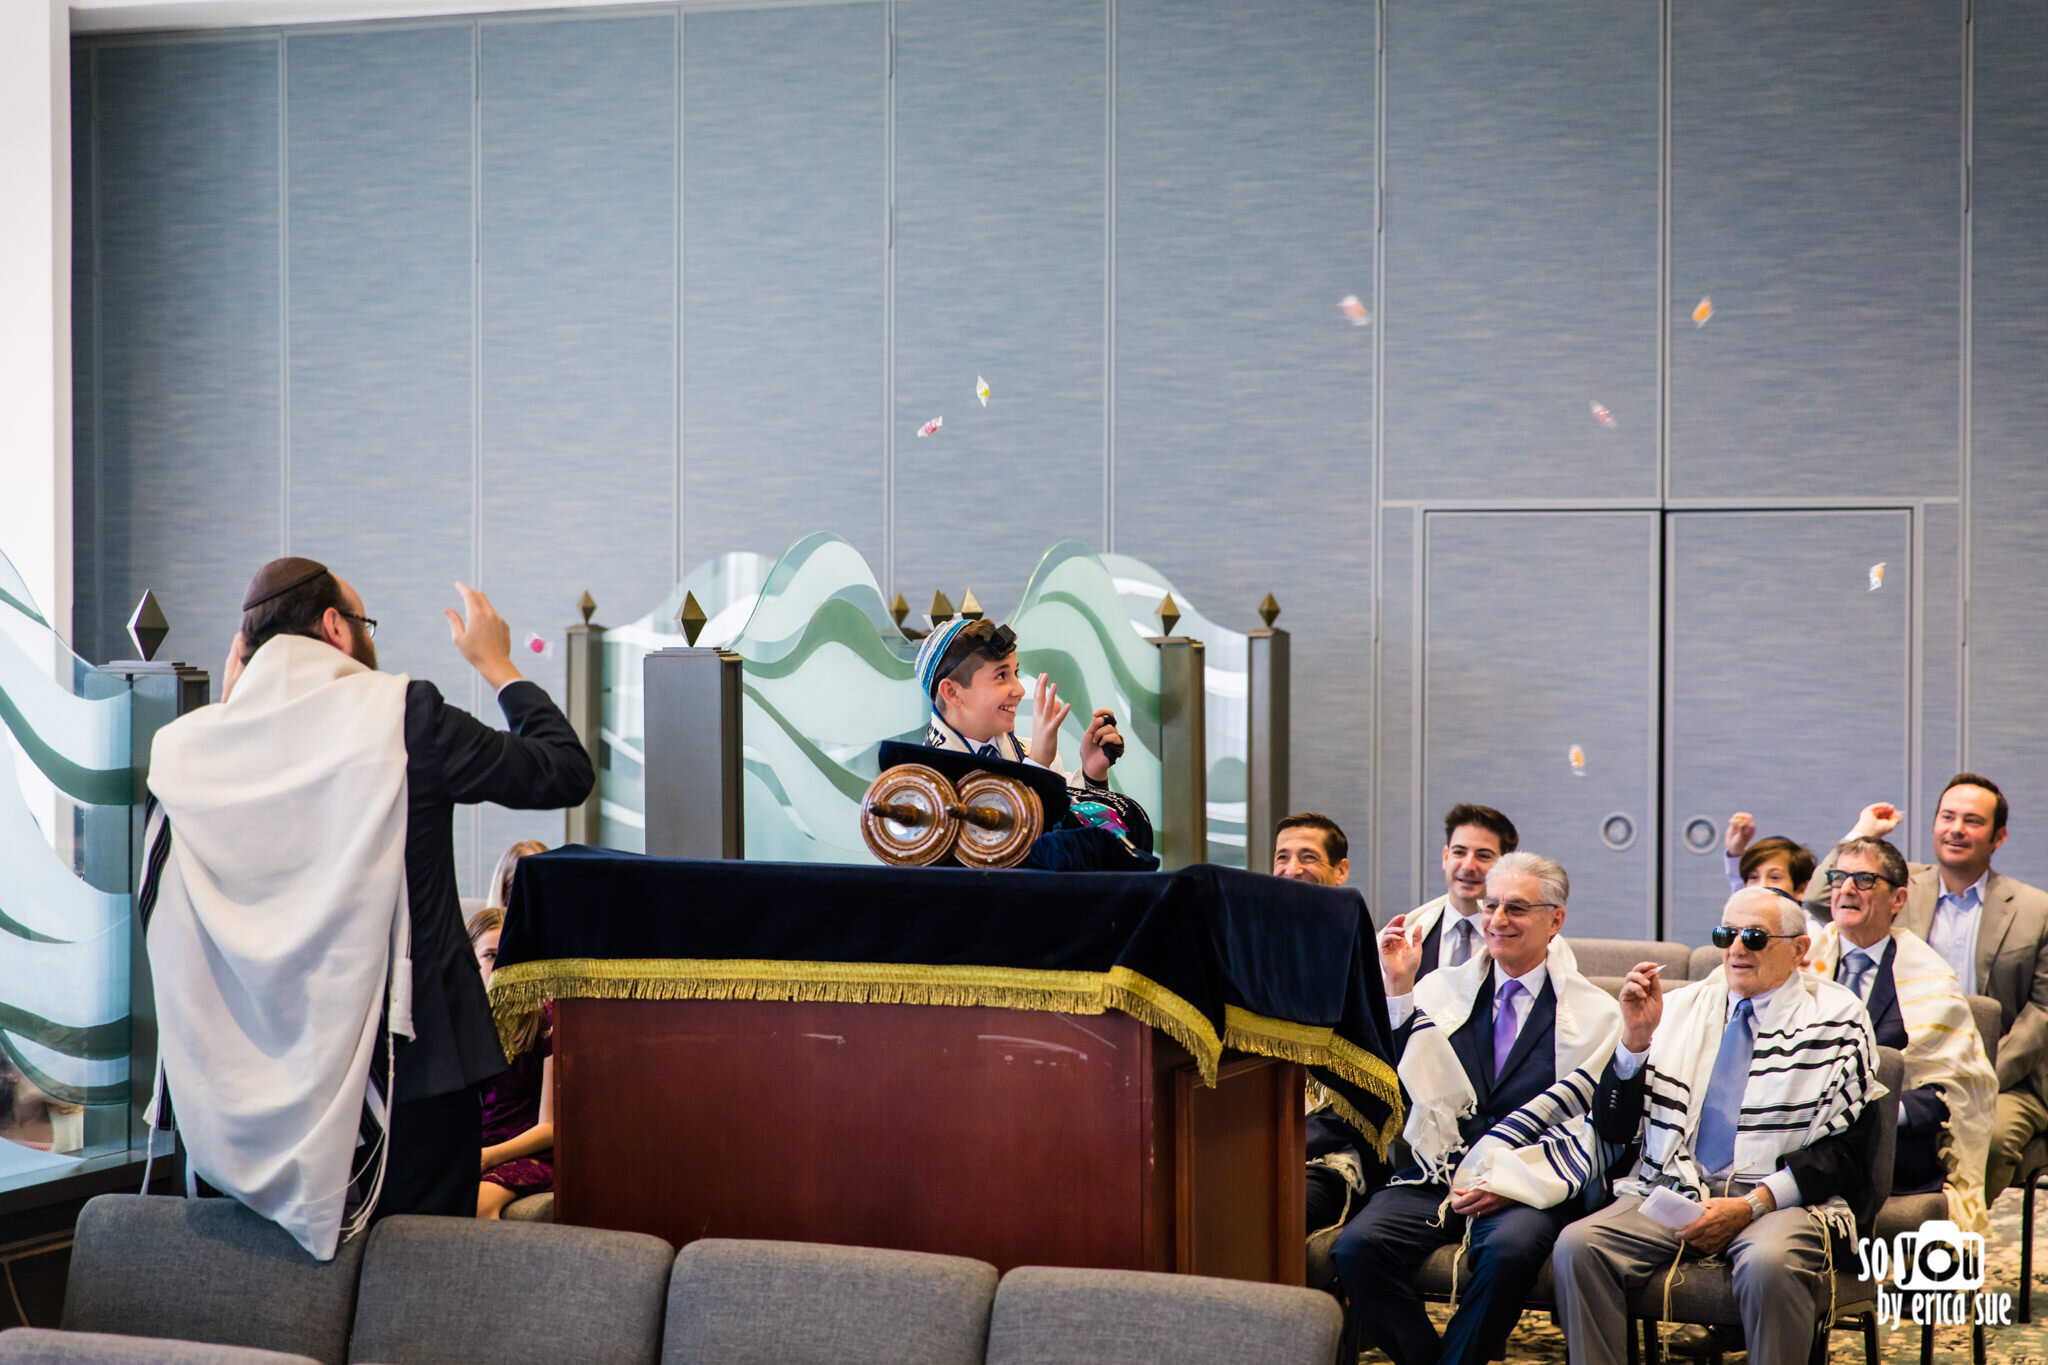 14-so-you-by-erica-sue-chabad-parkland-bar-mitzvah-photographer-.JPG